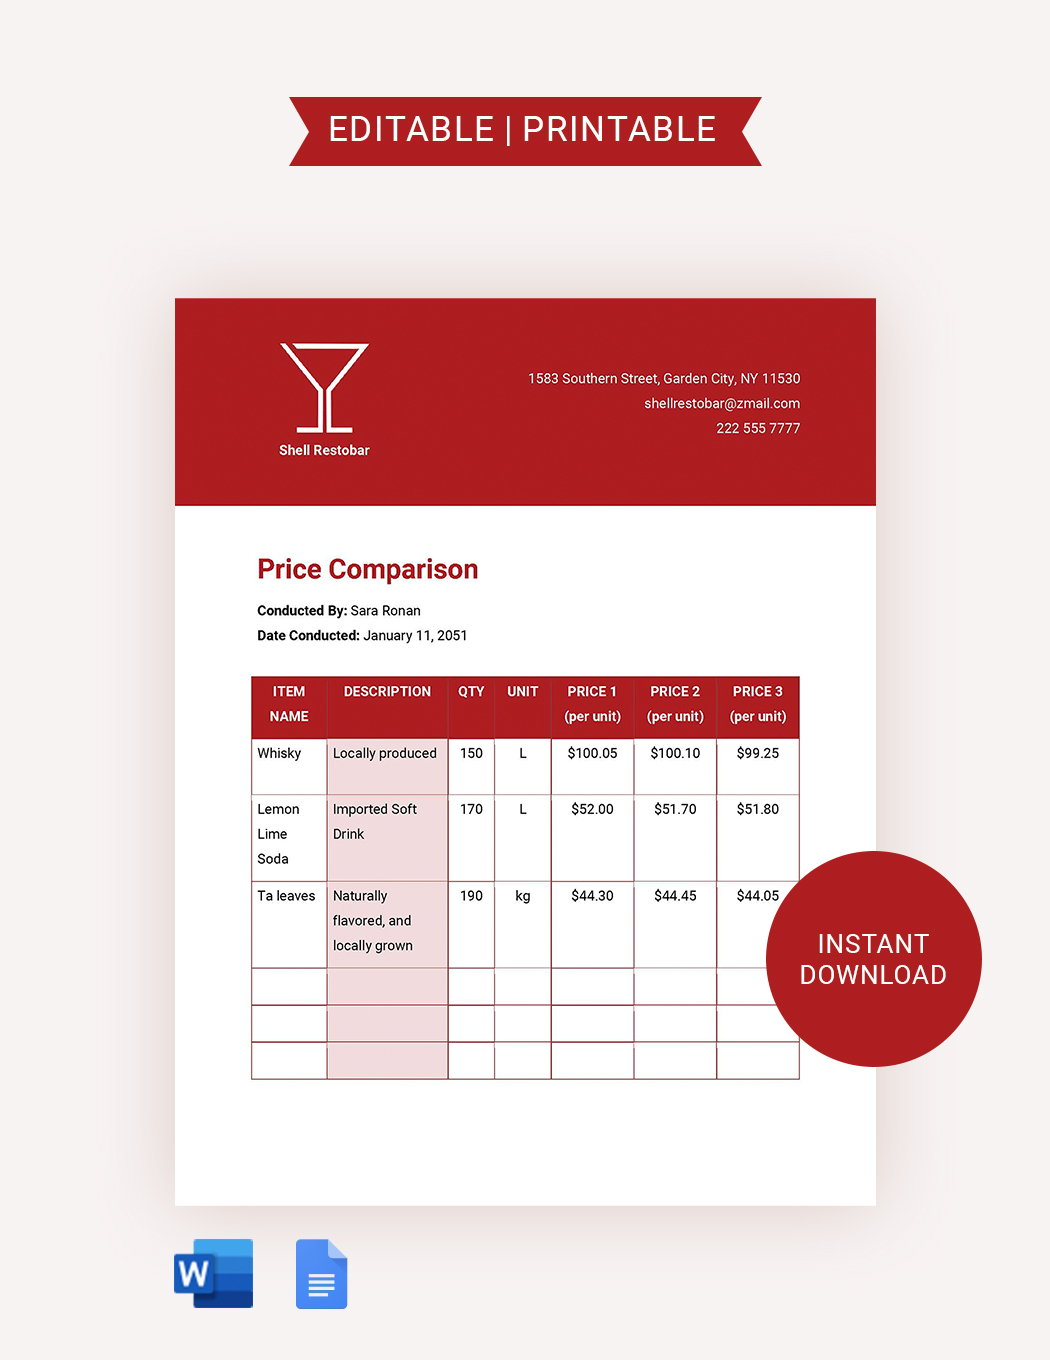 Tender Price Comparison Template in Word, Google Docs